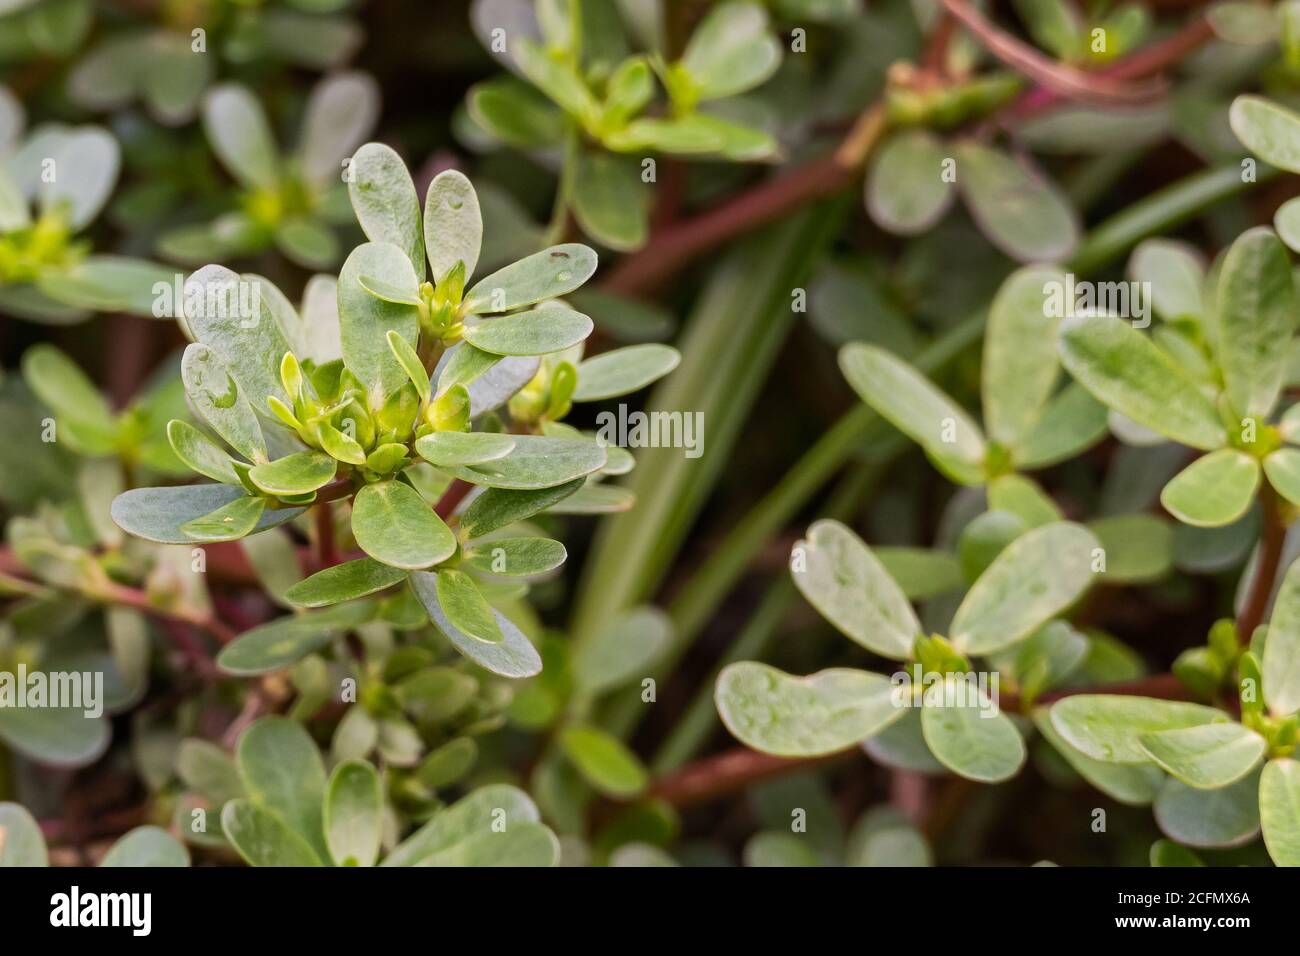 purslane plant portulaca oleracea outdoors close up view with daylight Stock Photo